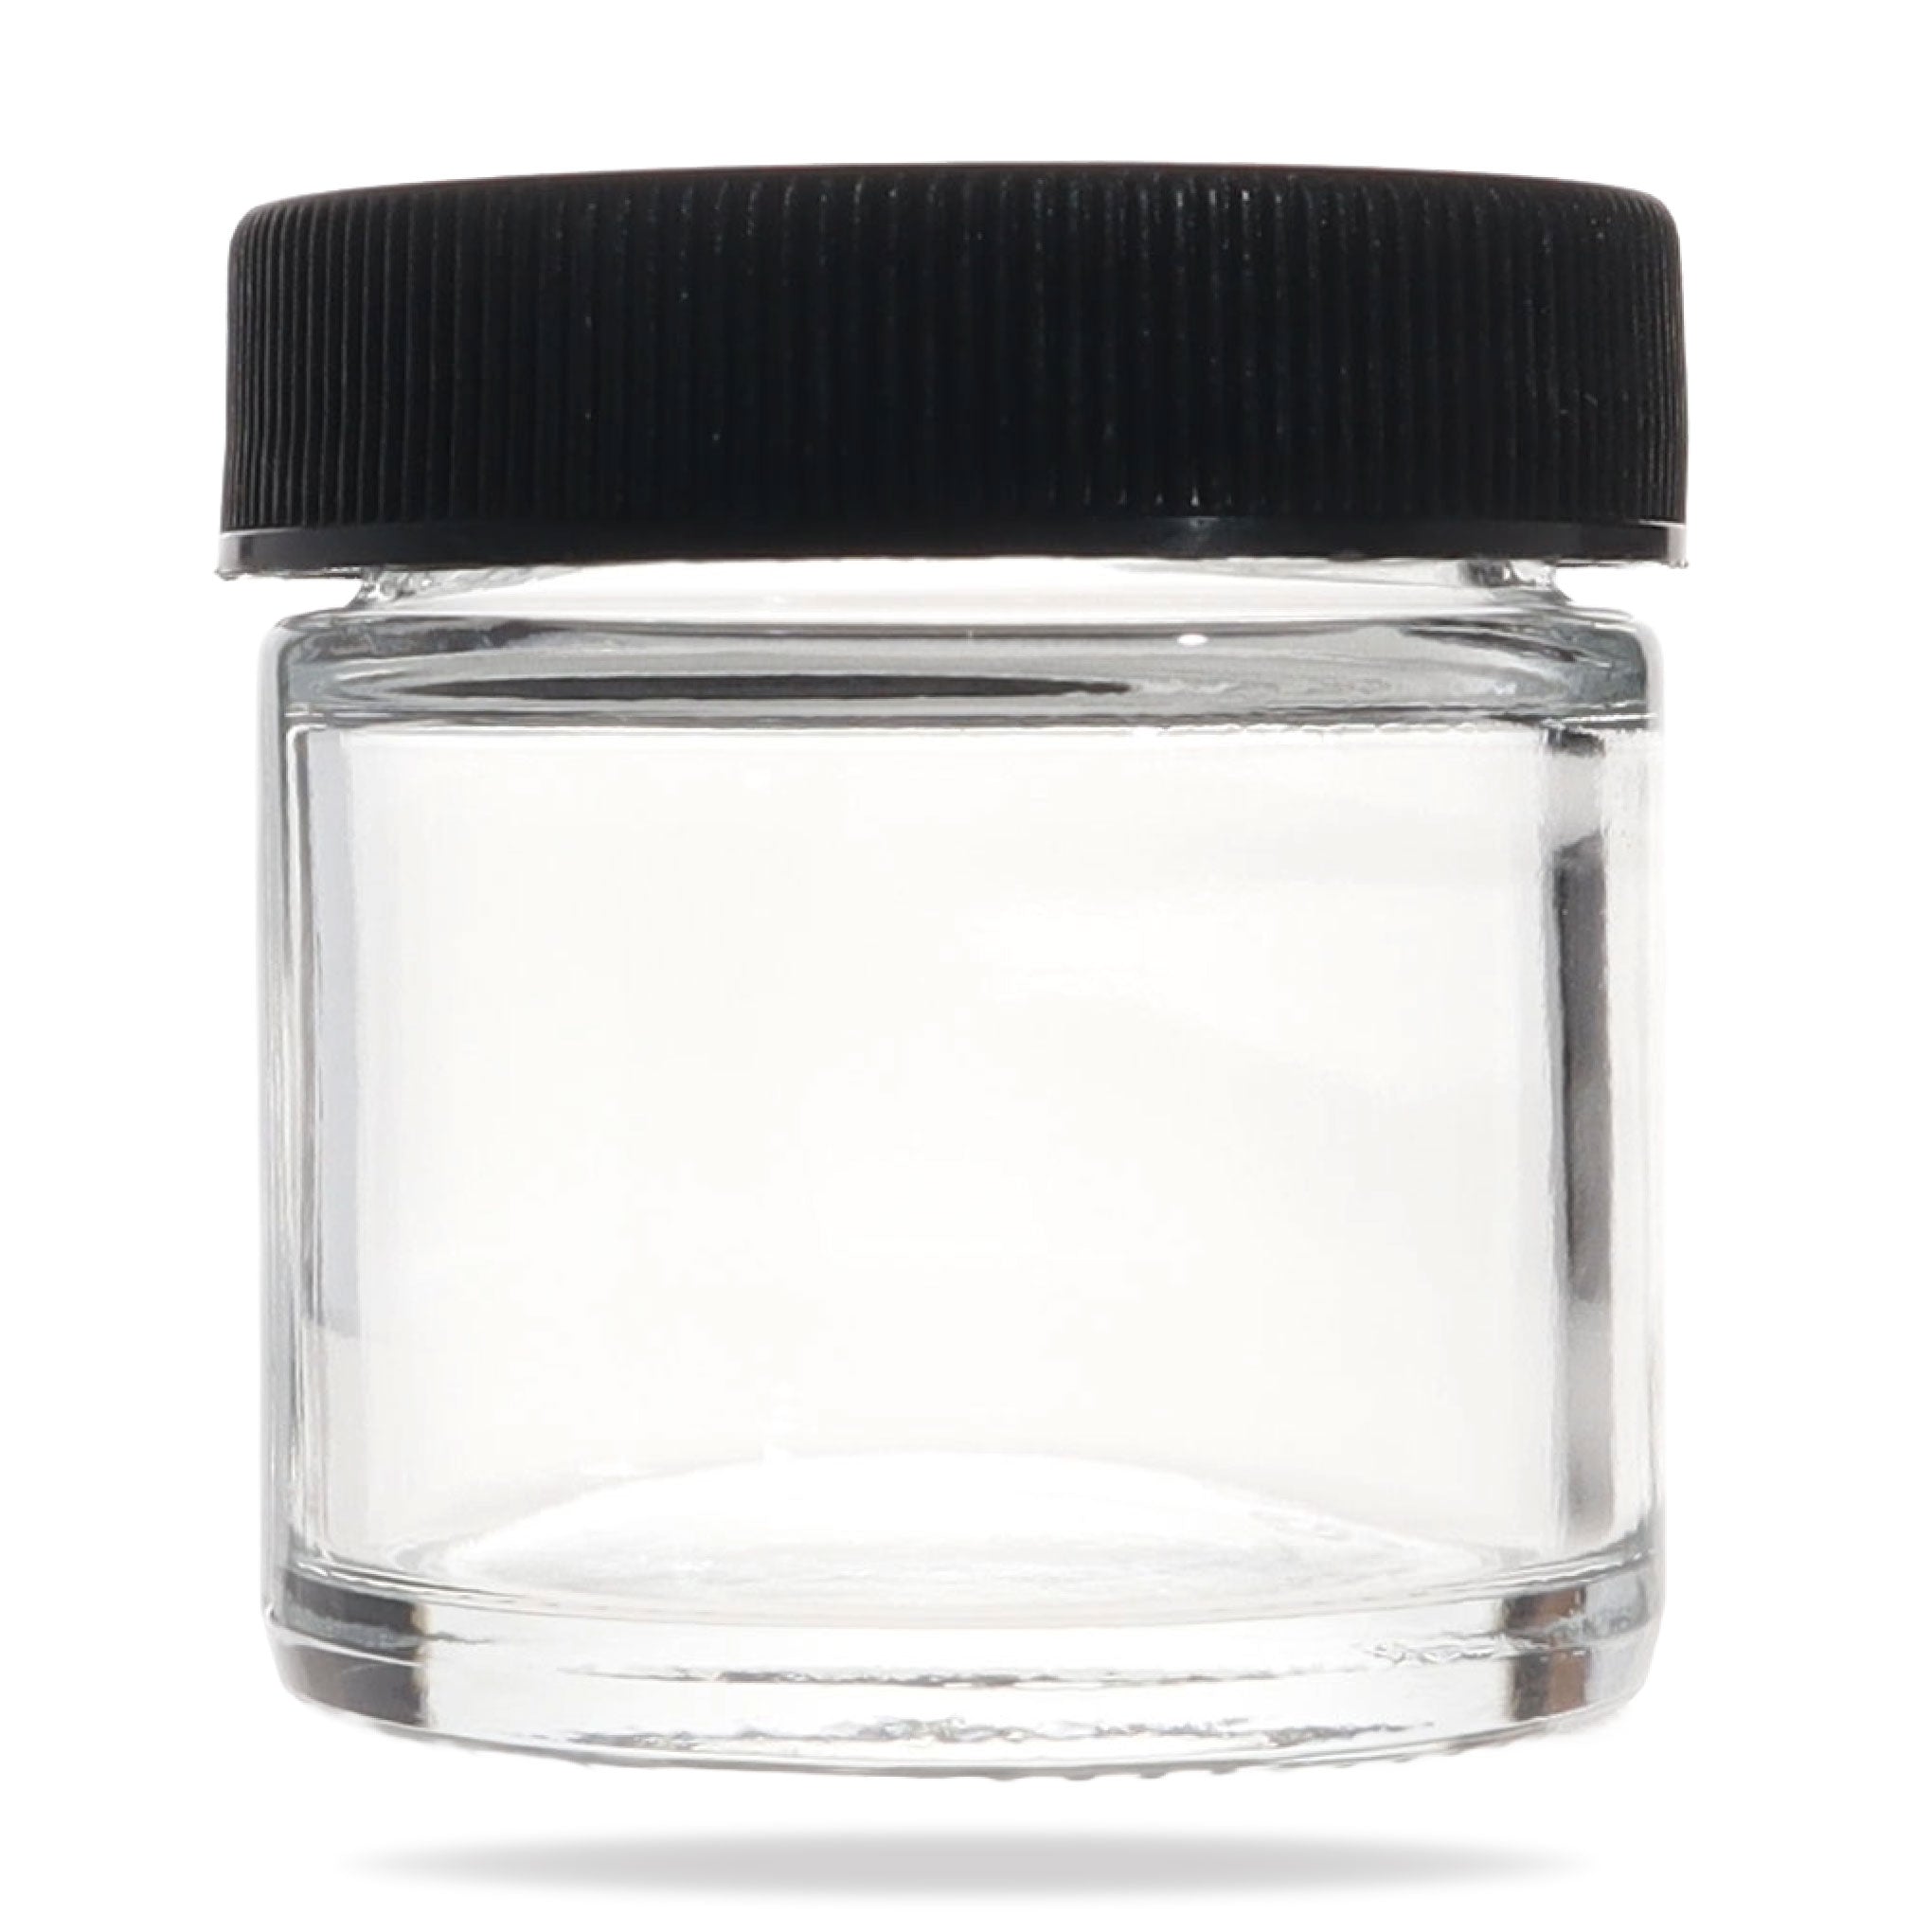 Image of a 1 ounce glass jar with black plastic lid.